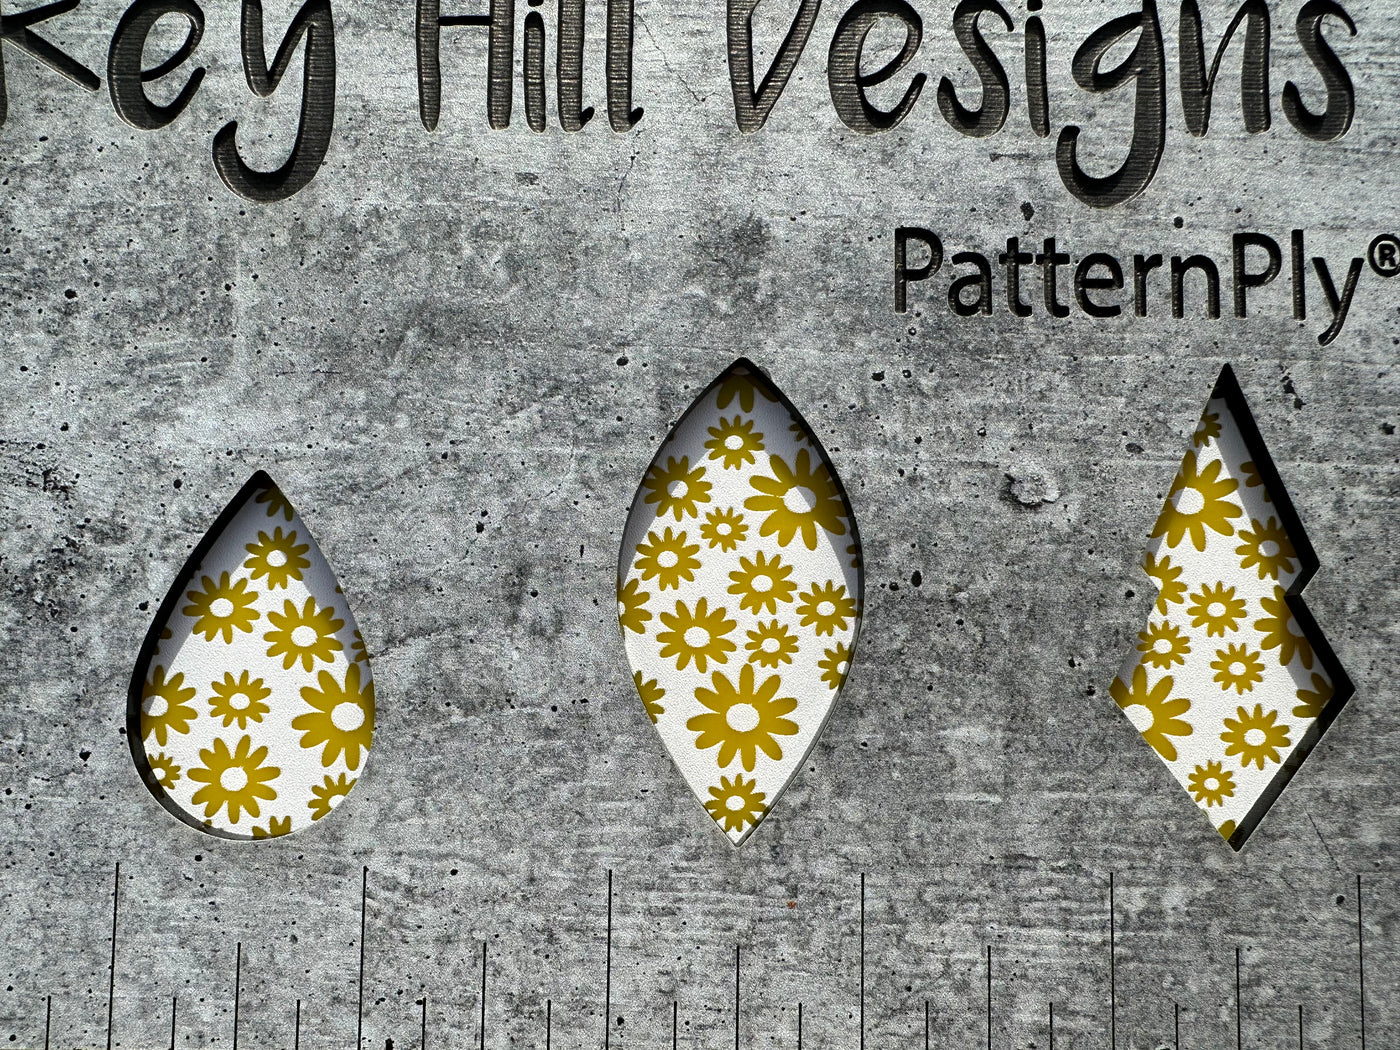 PatternPly® Scattered Daisies WHITE